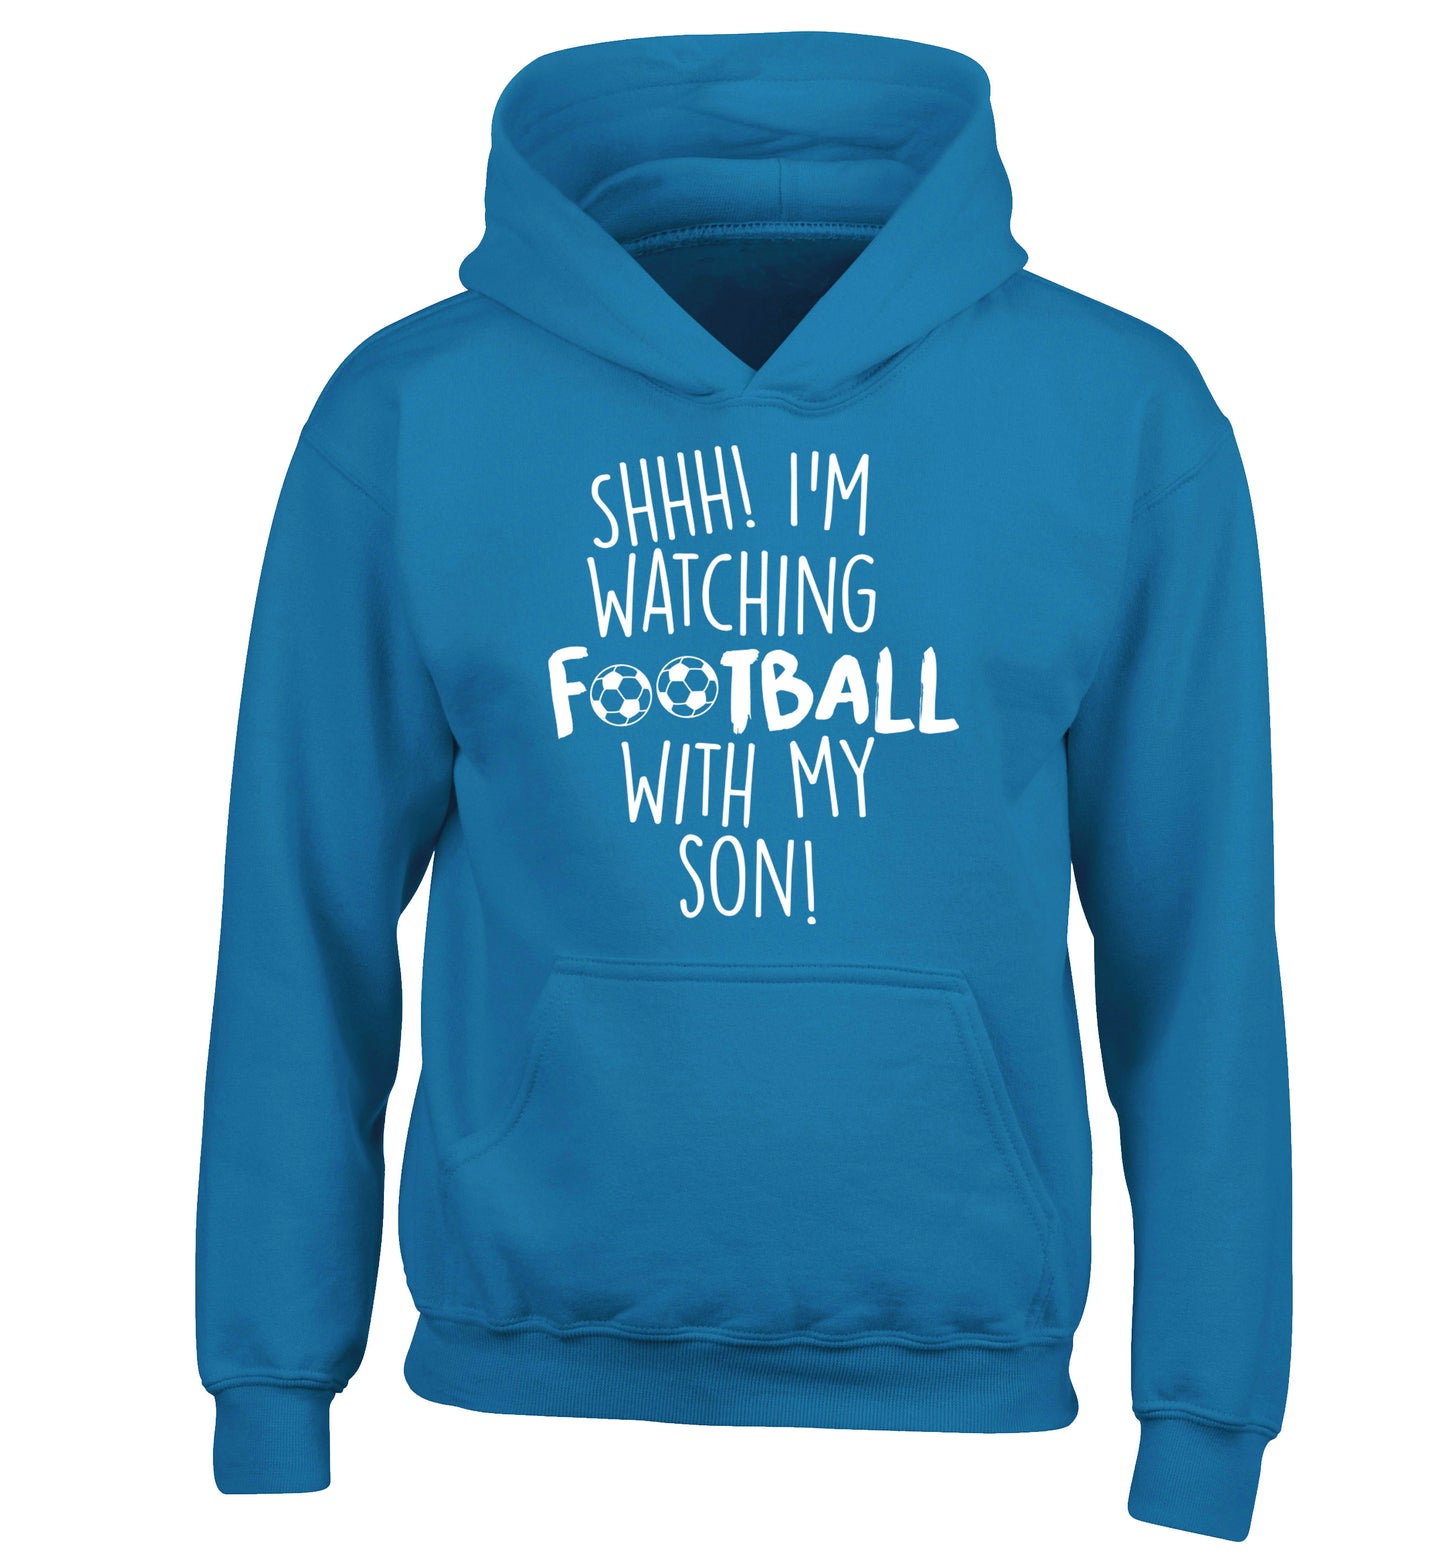 Shhh I'm watching football with my son children's blue hoodie 12-14 Years